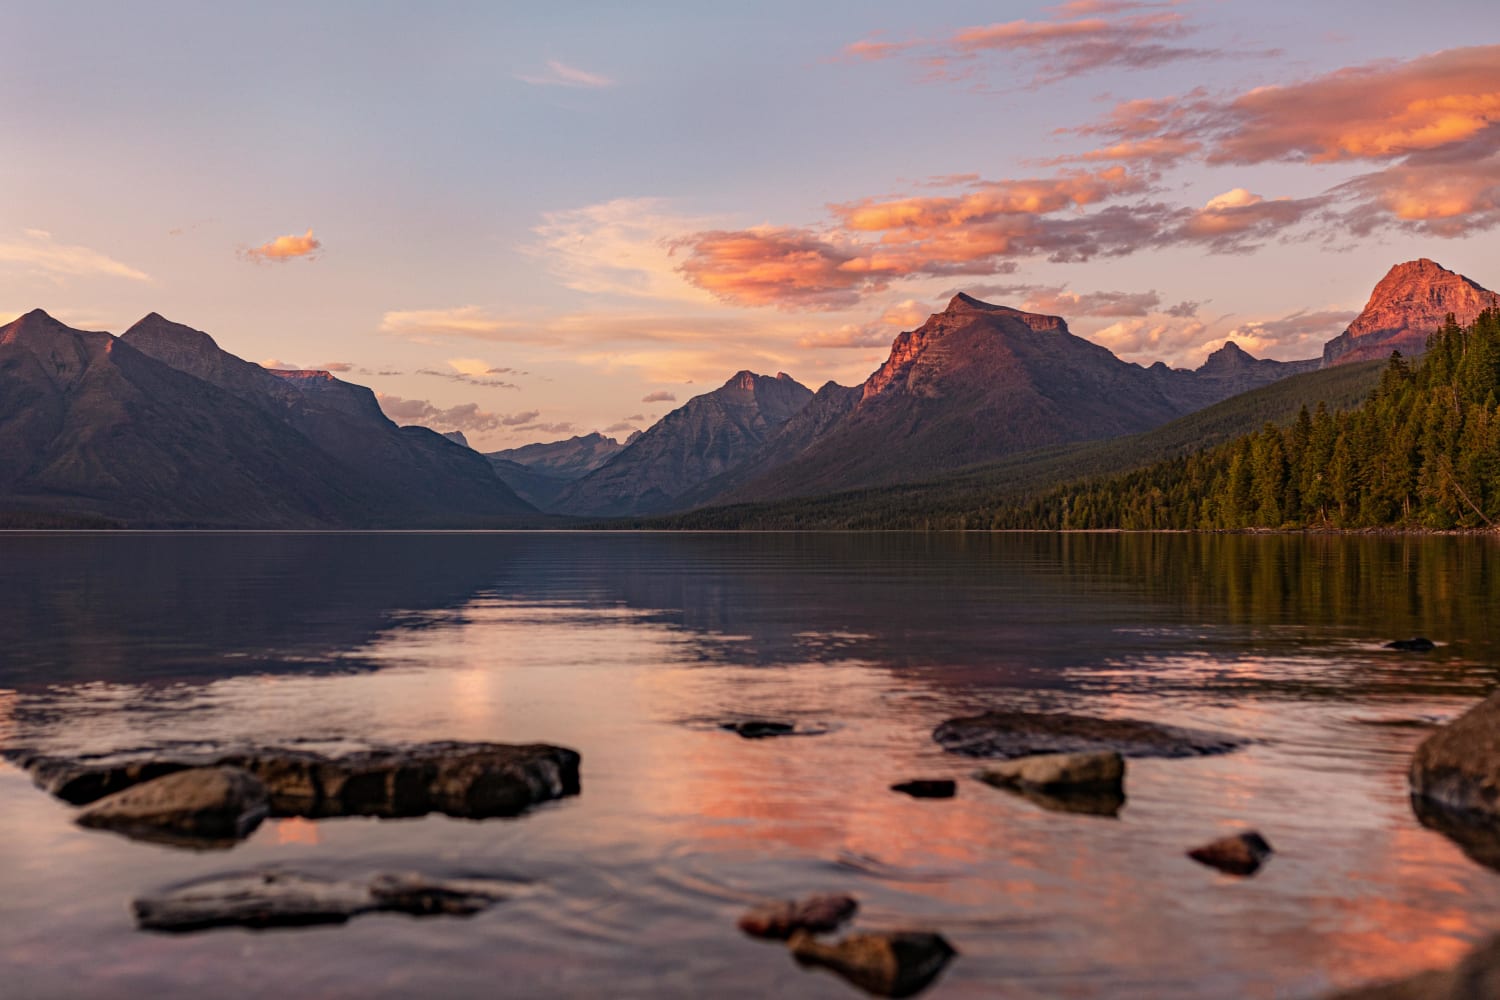 Wife took this during sunset - Glacier National Park, Montana